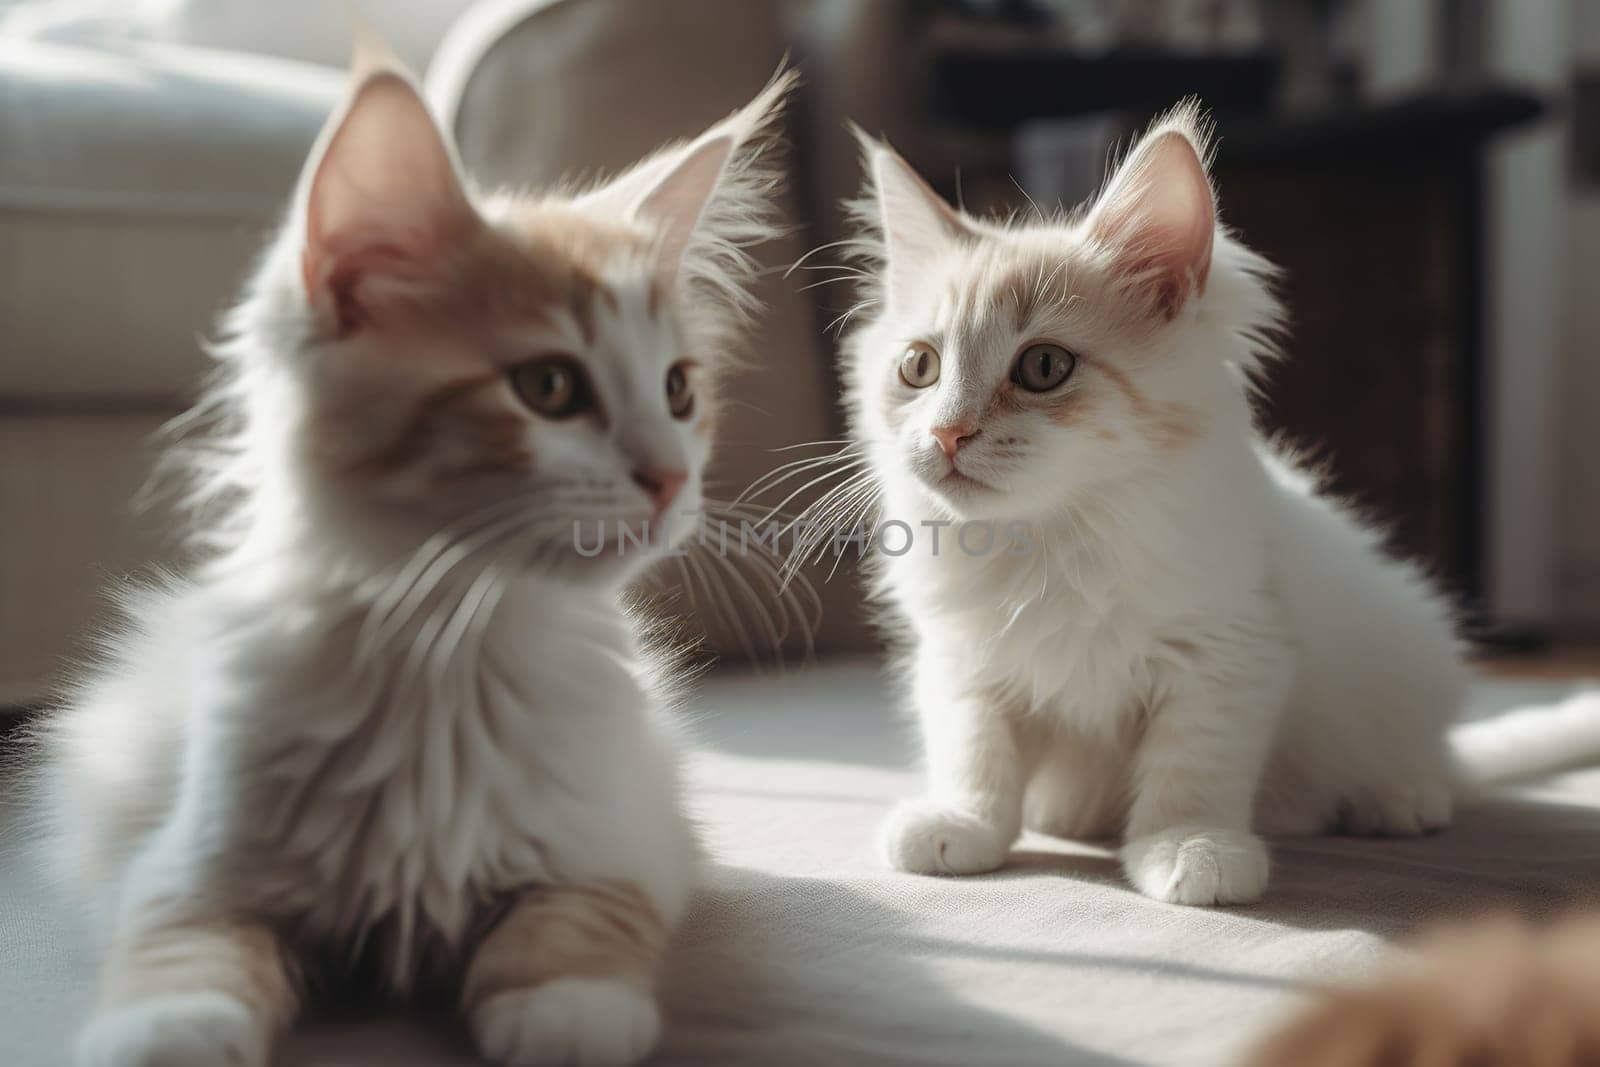 Norwegian Forest Kittens Playing In Room, Adorable Pets At Home by GekaSkr